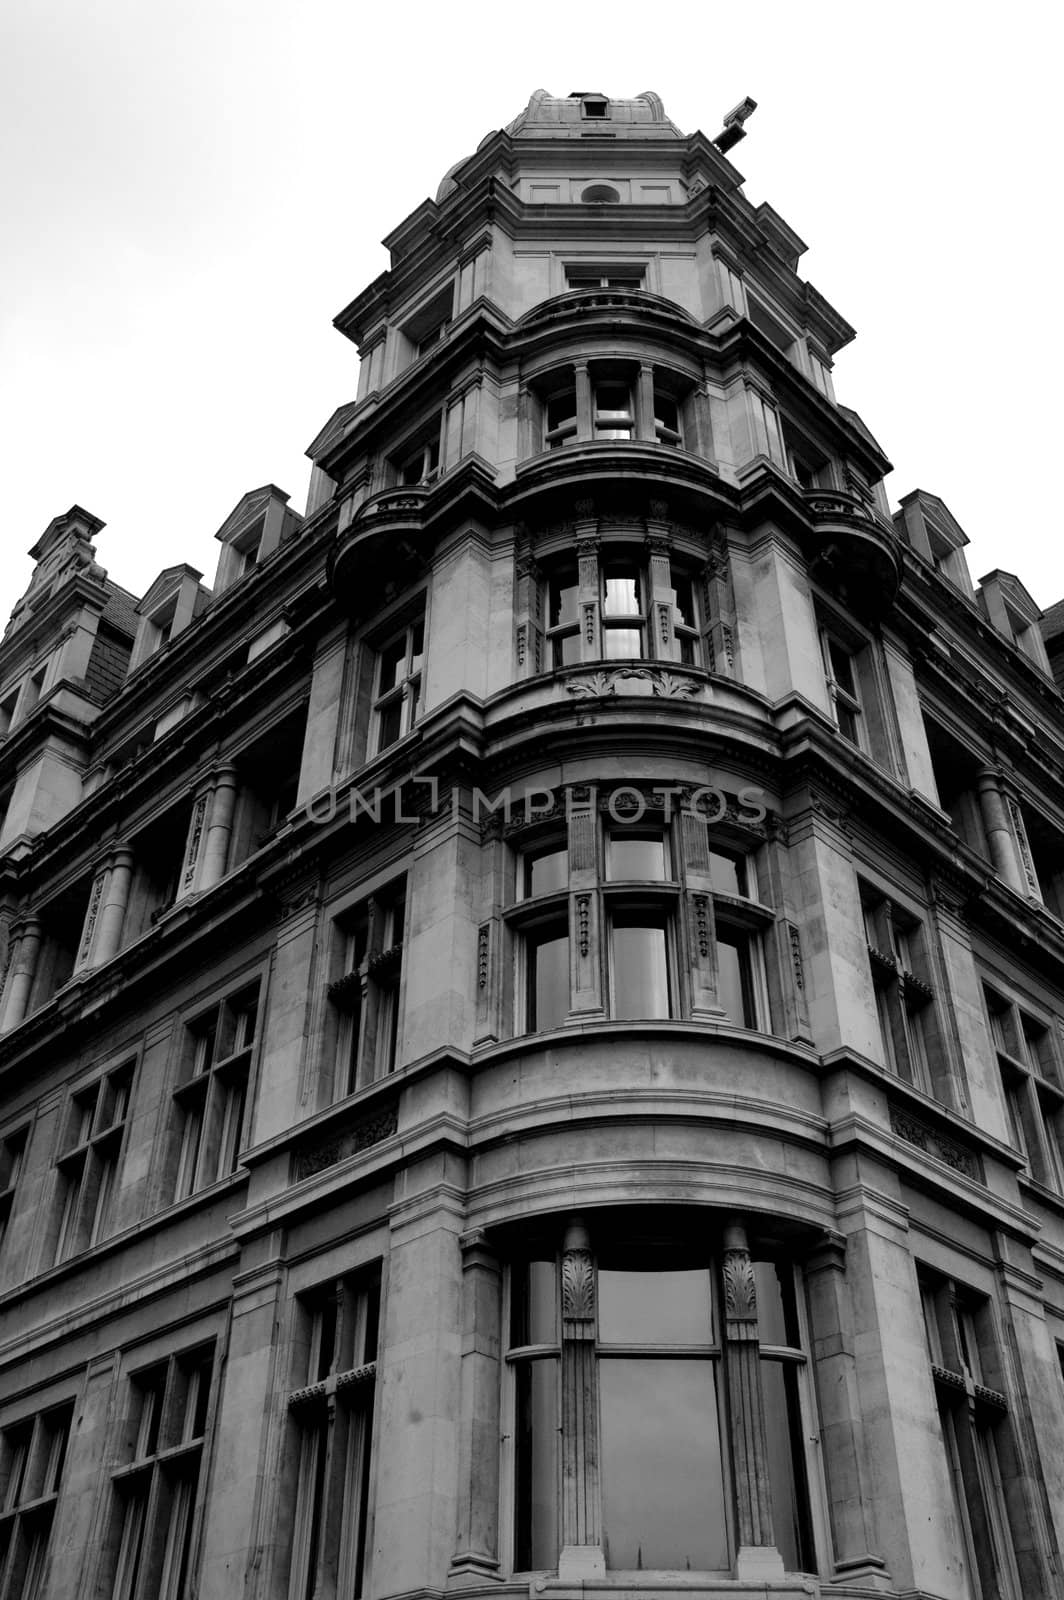 London Architecture by eugenef